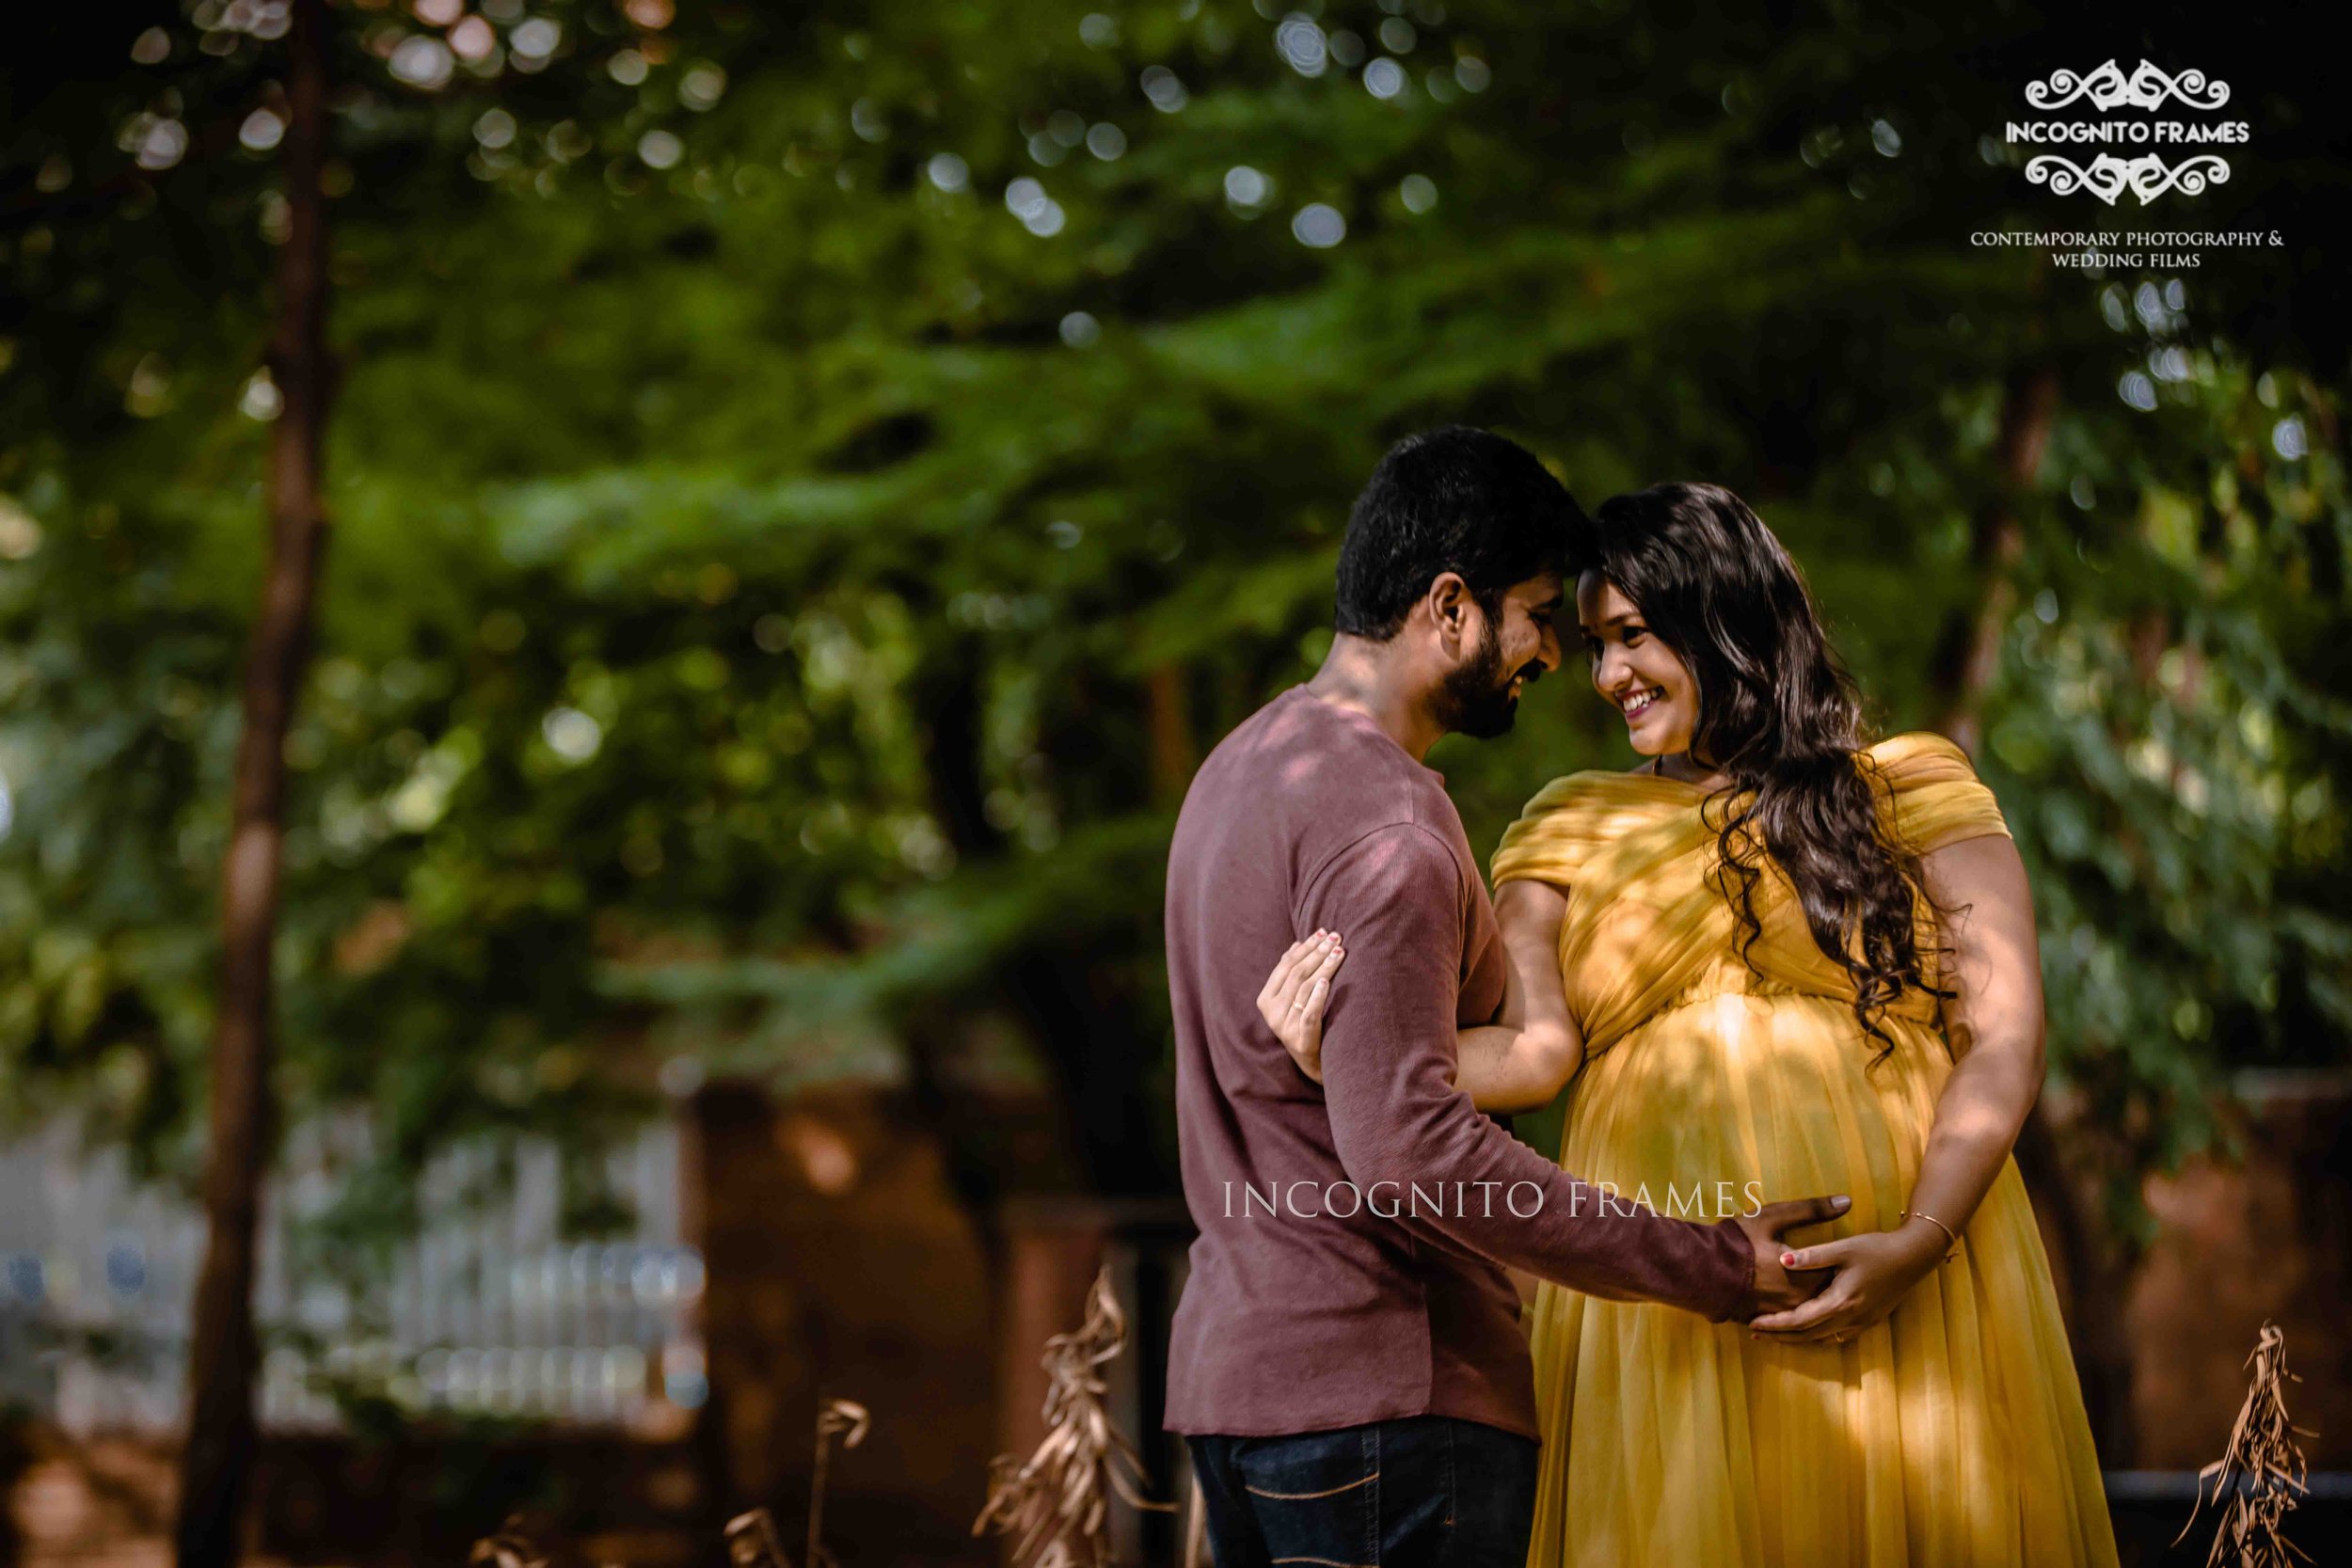 FINDING THE RIGHT MATERNITY PHOTOGRAPHER IN INDORE  Joseph King Photography